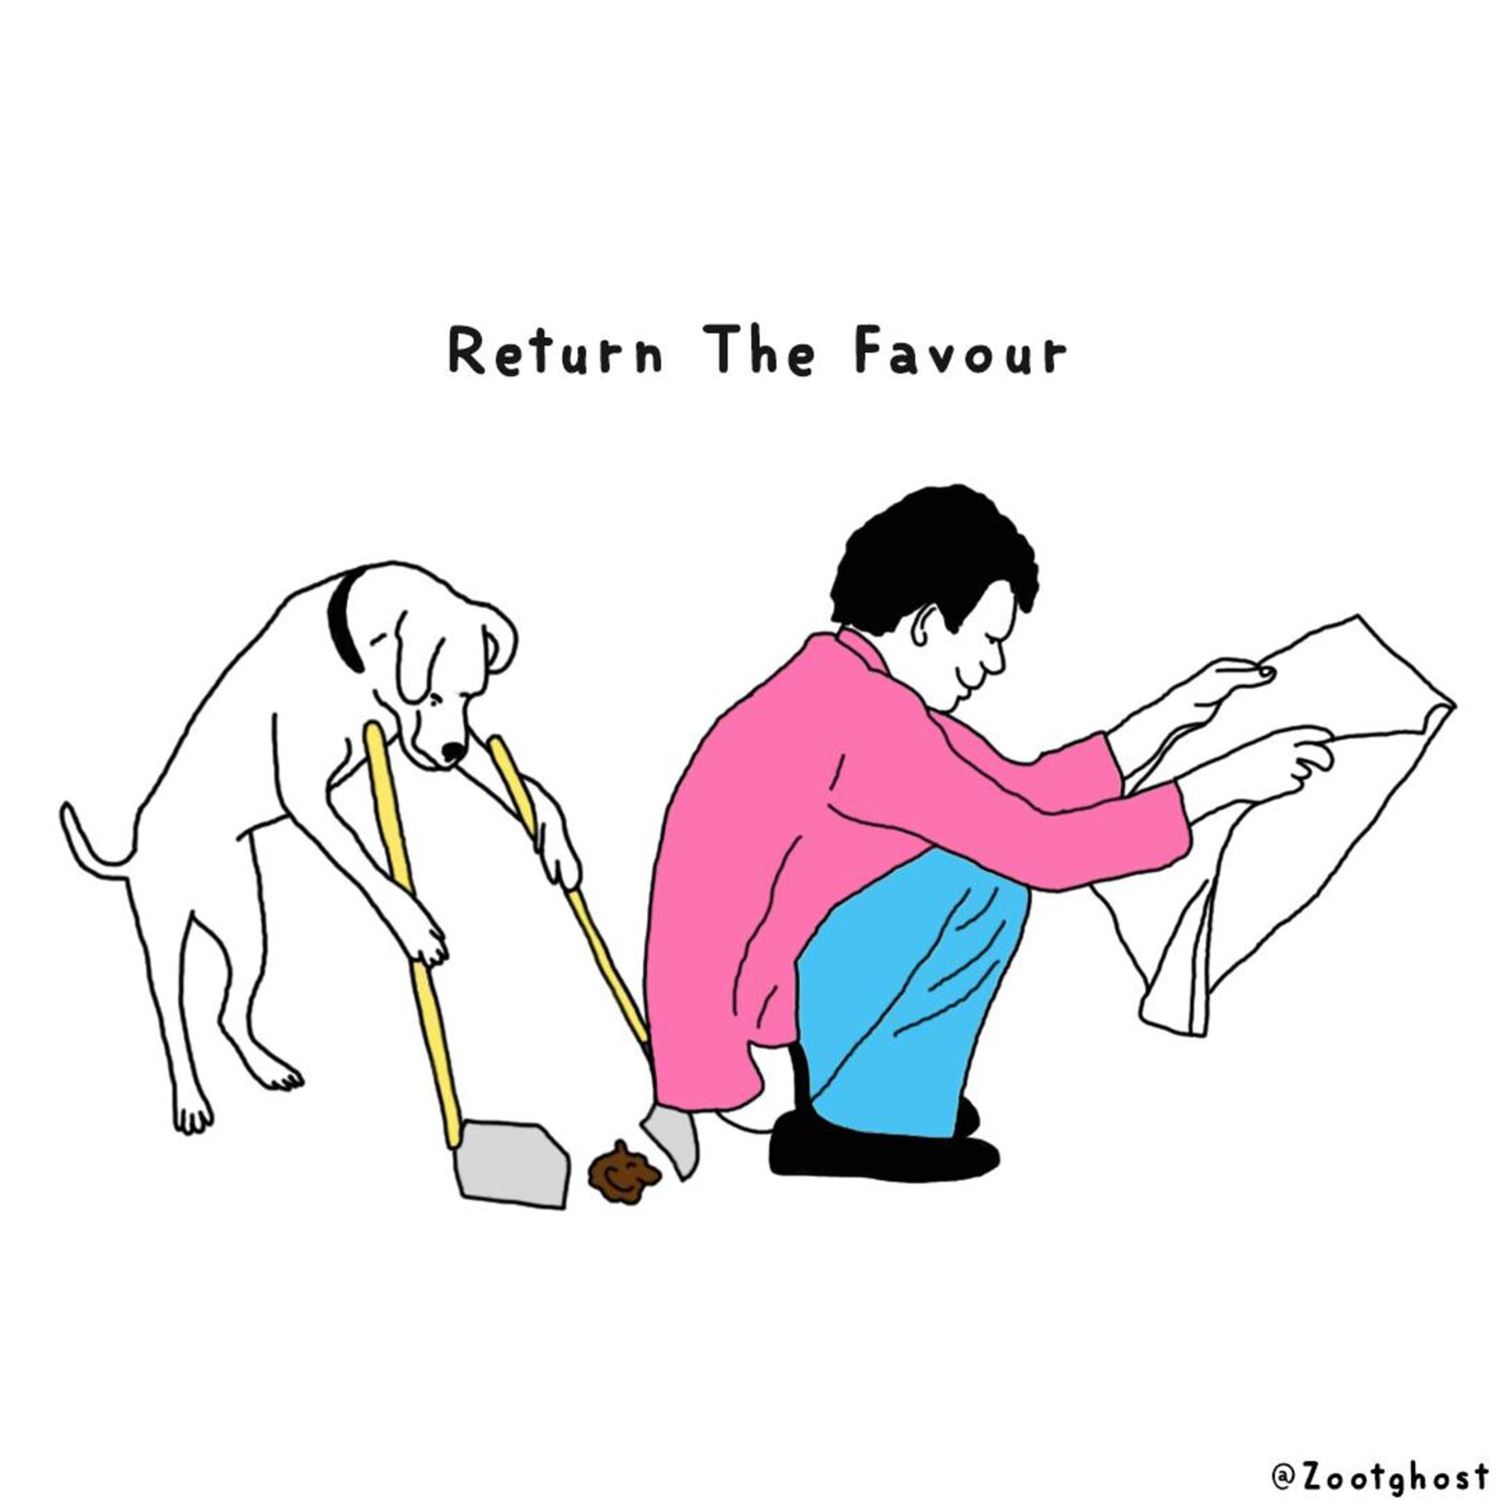 Psychology behind returning the favour